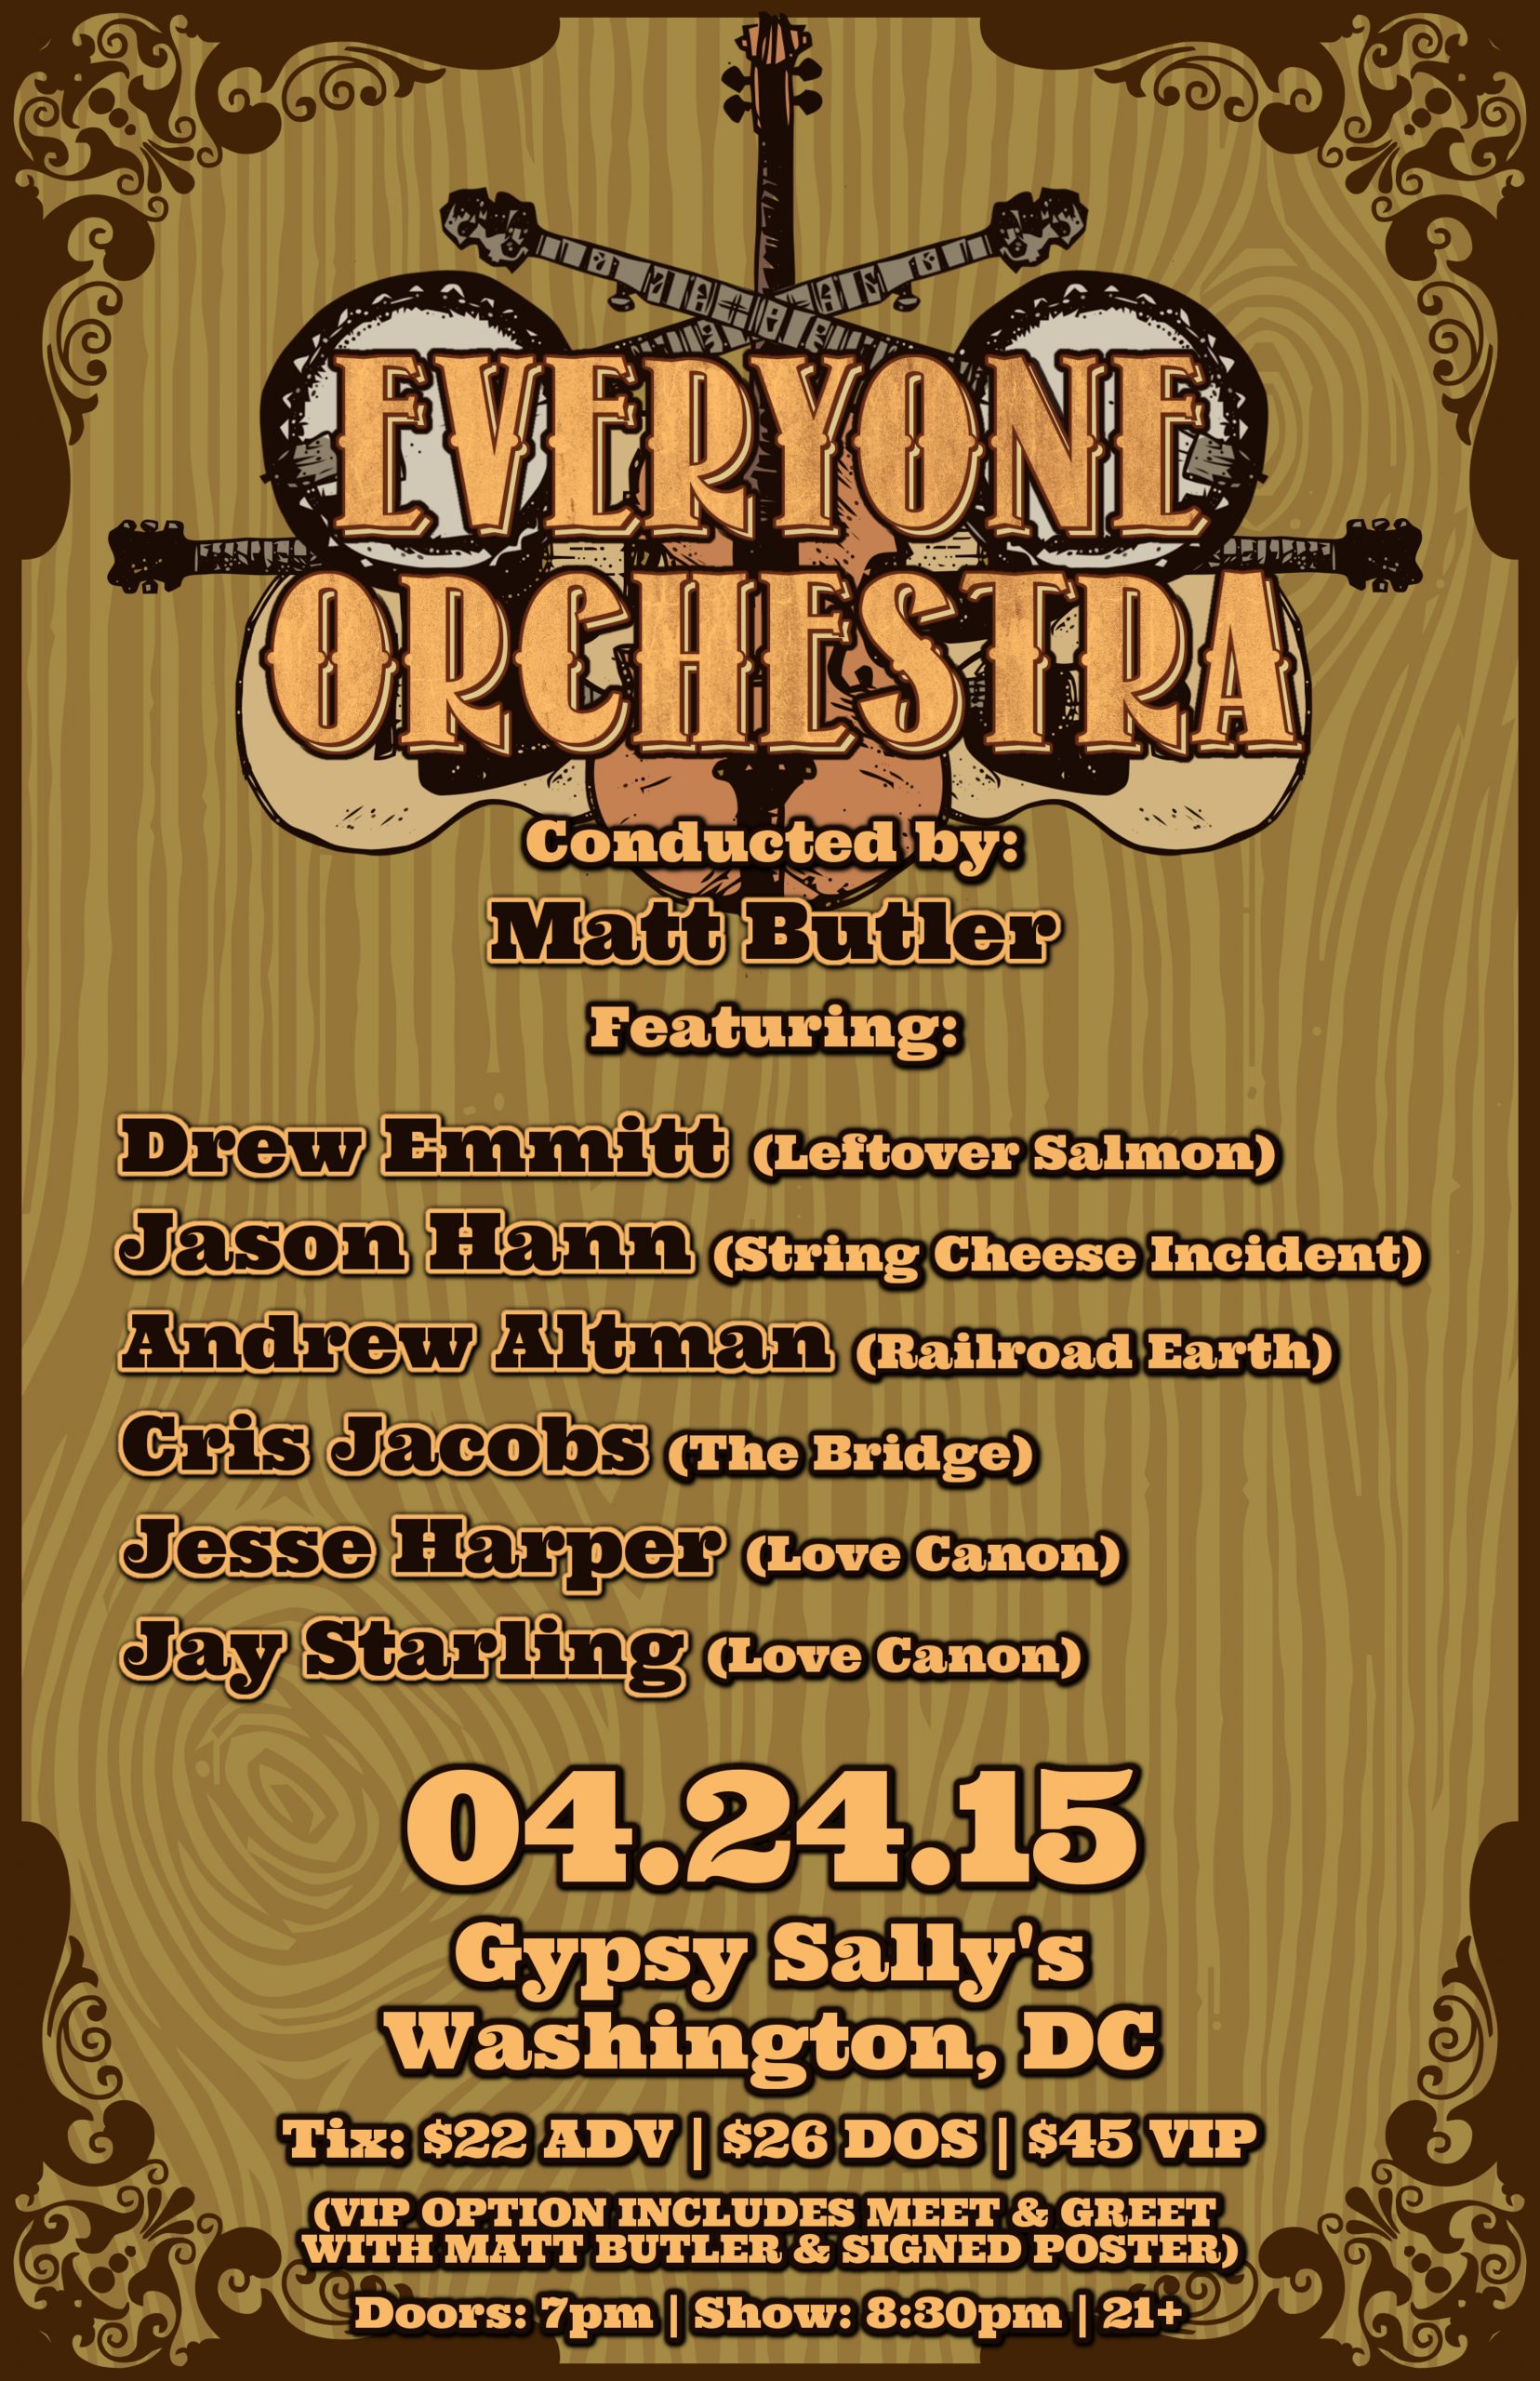 The Everyone Orchestra Plays Gypsy Sally’s Fri 4/24 w/ Members of Leftover Salmon, String Cheese Incident, Railroad Earth, The Bridge, and Love Canon